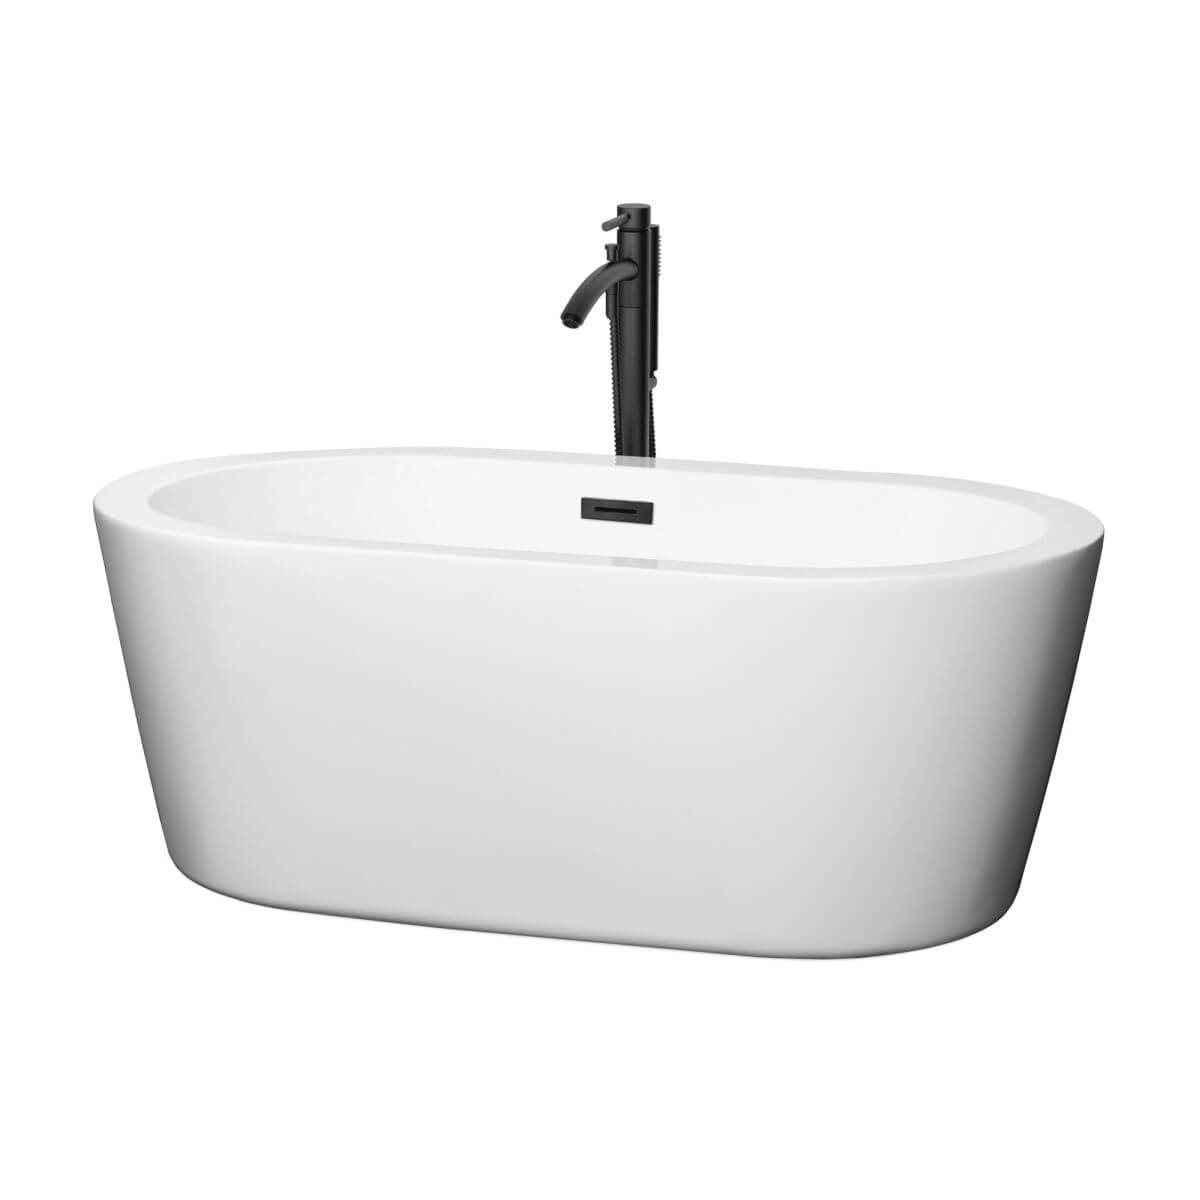 Wyndham Collection Mermaid 60 inch Freestanding Bathtub in White with Floor Mounted Faucet, Drain and Overflow Trim in Matte Black - WCOBT100360MBATPBK